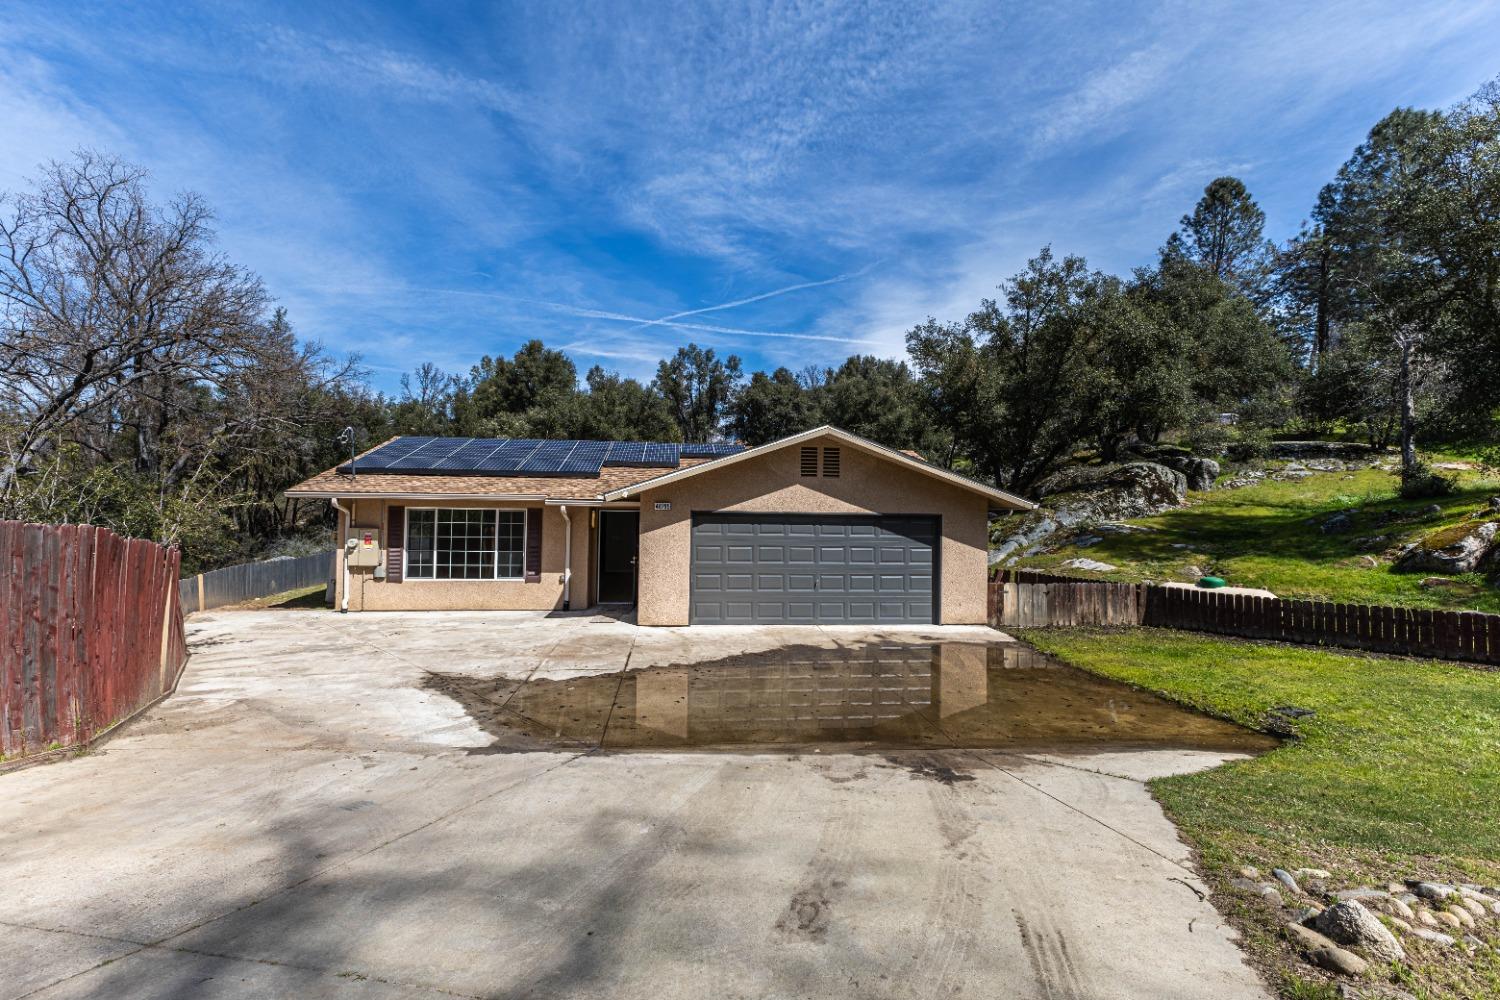 Photo of 48795 Rock Point Rd in Oakhurst, CA